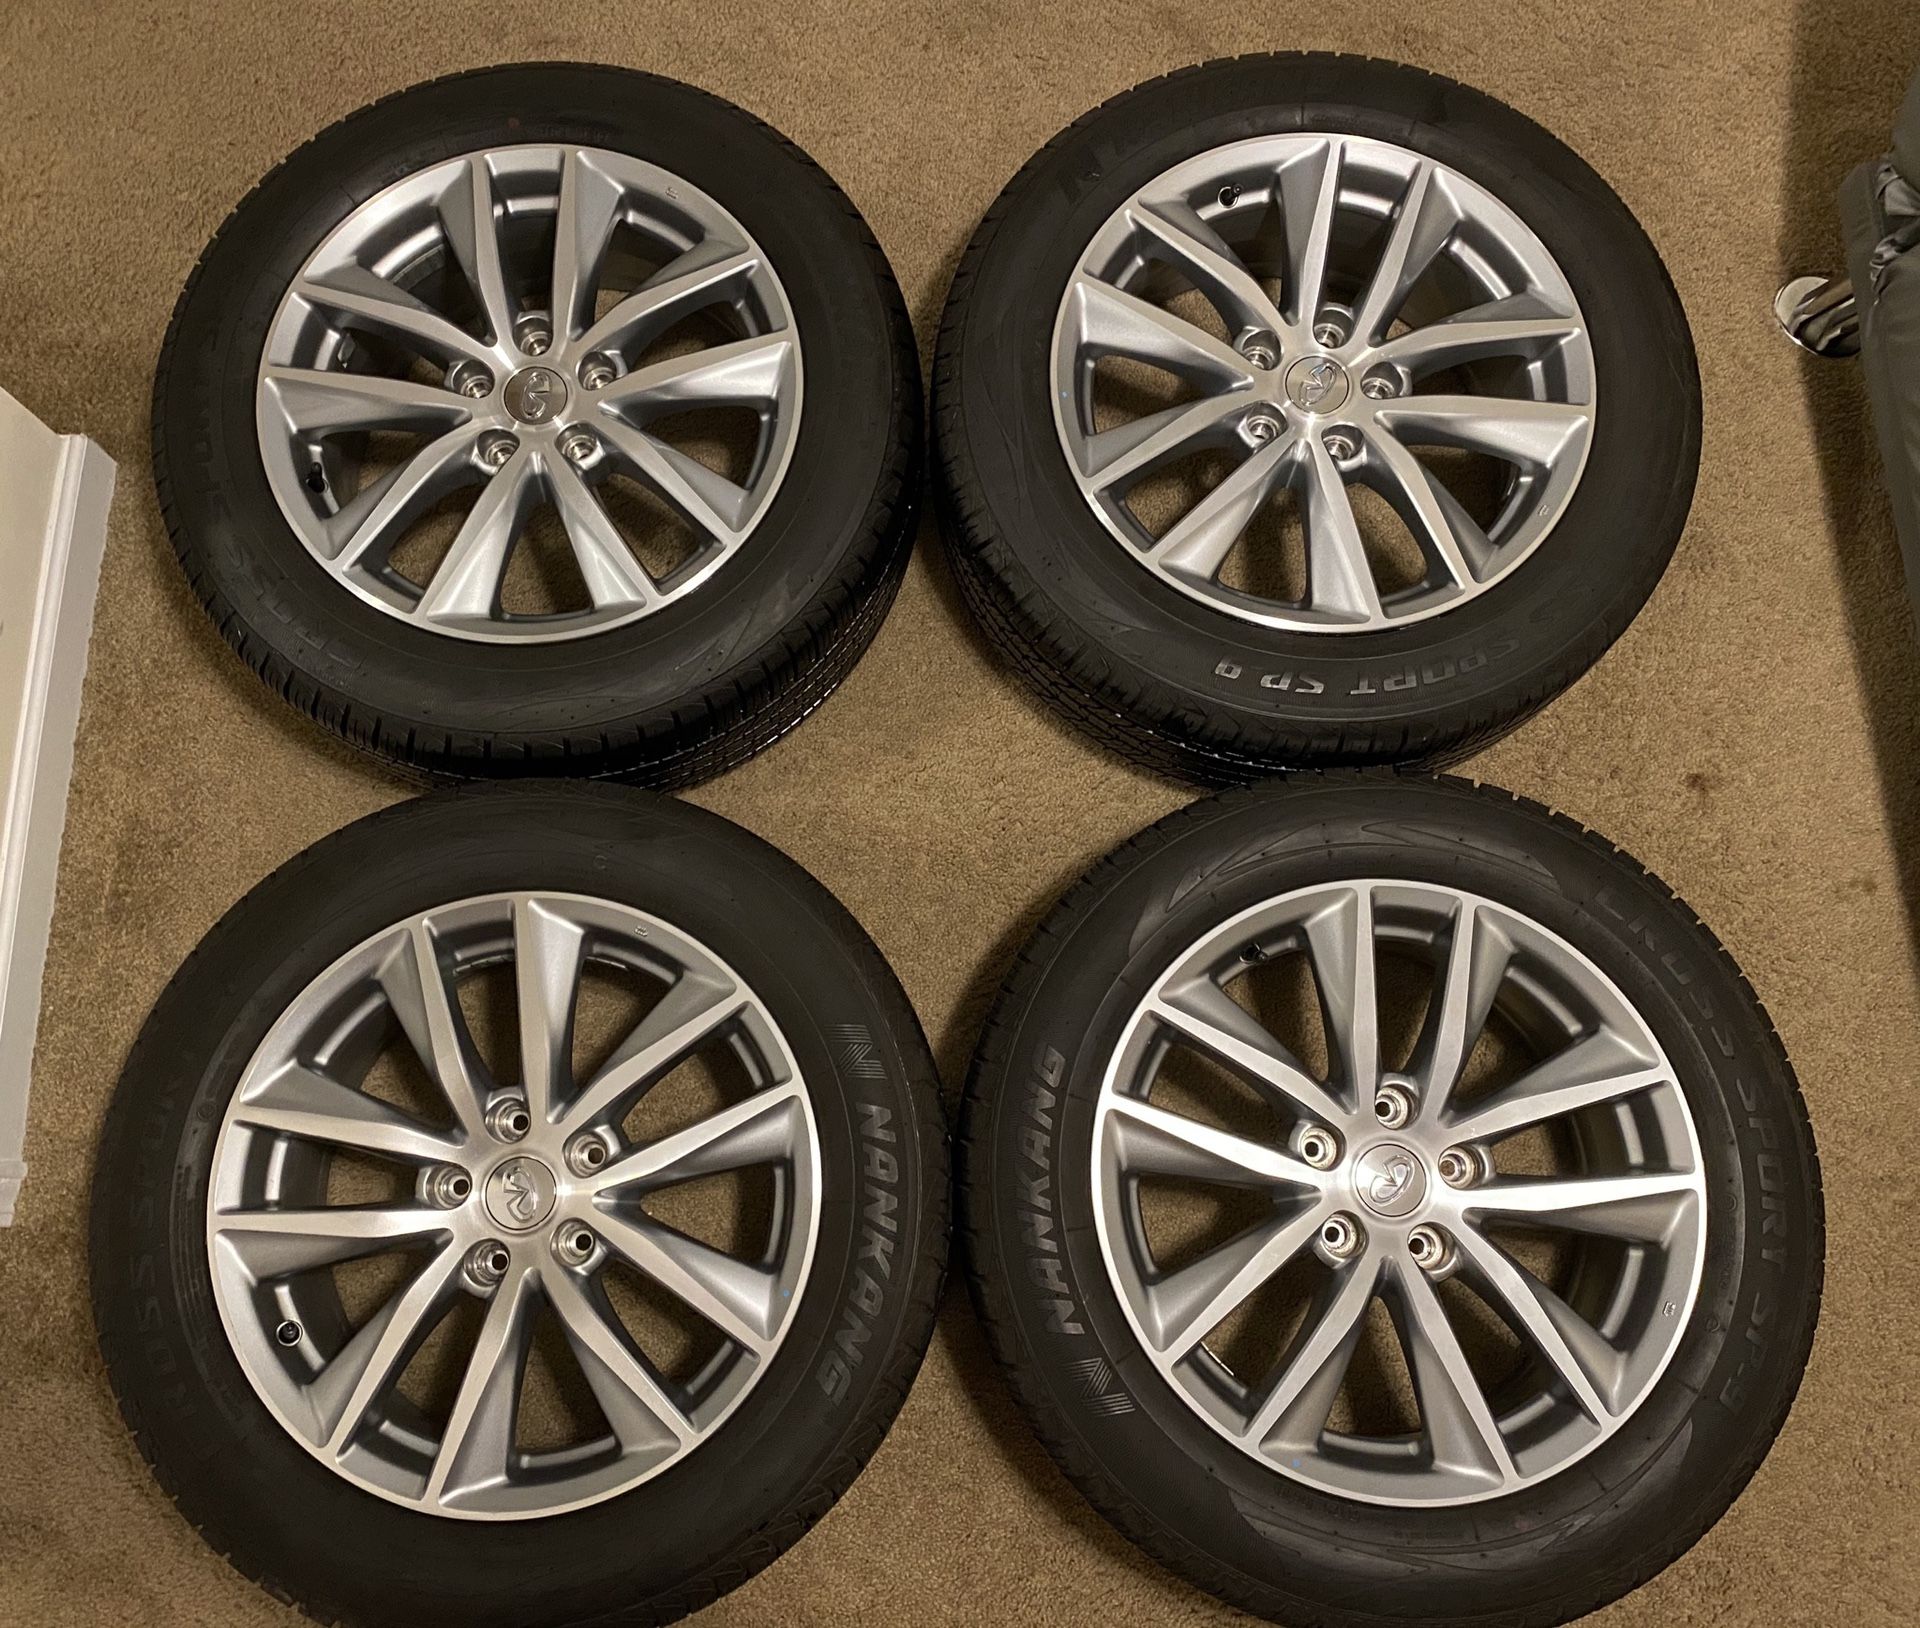 Nissan Wheels with tires 225/55/17